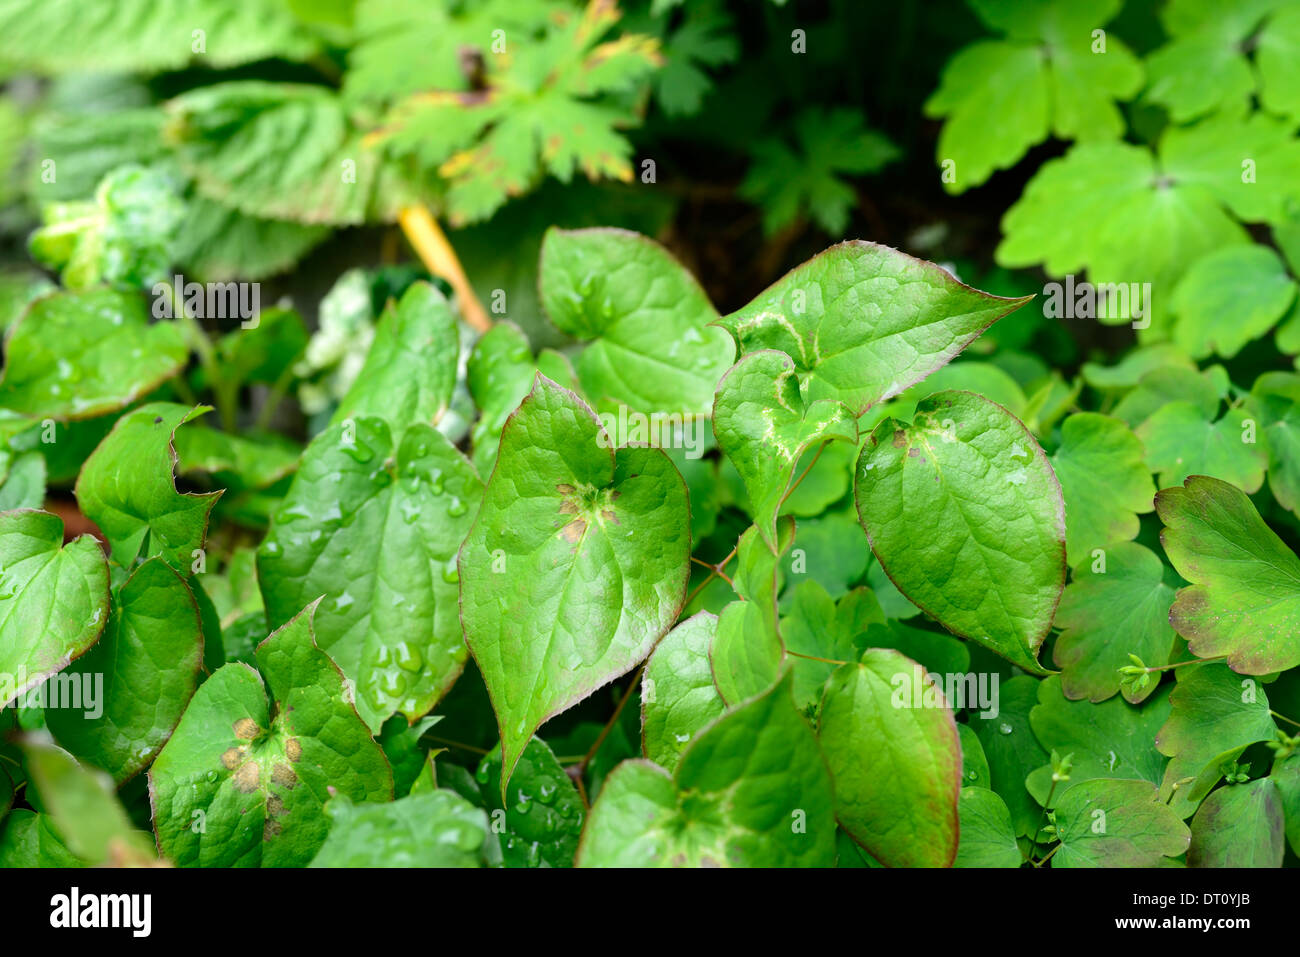 epimedium youngianum roseum spring green foliage leaves new growth groundcover plant planting Stock Photo